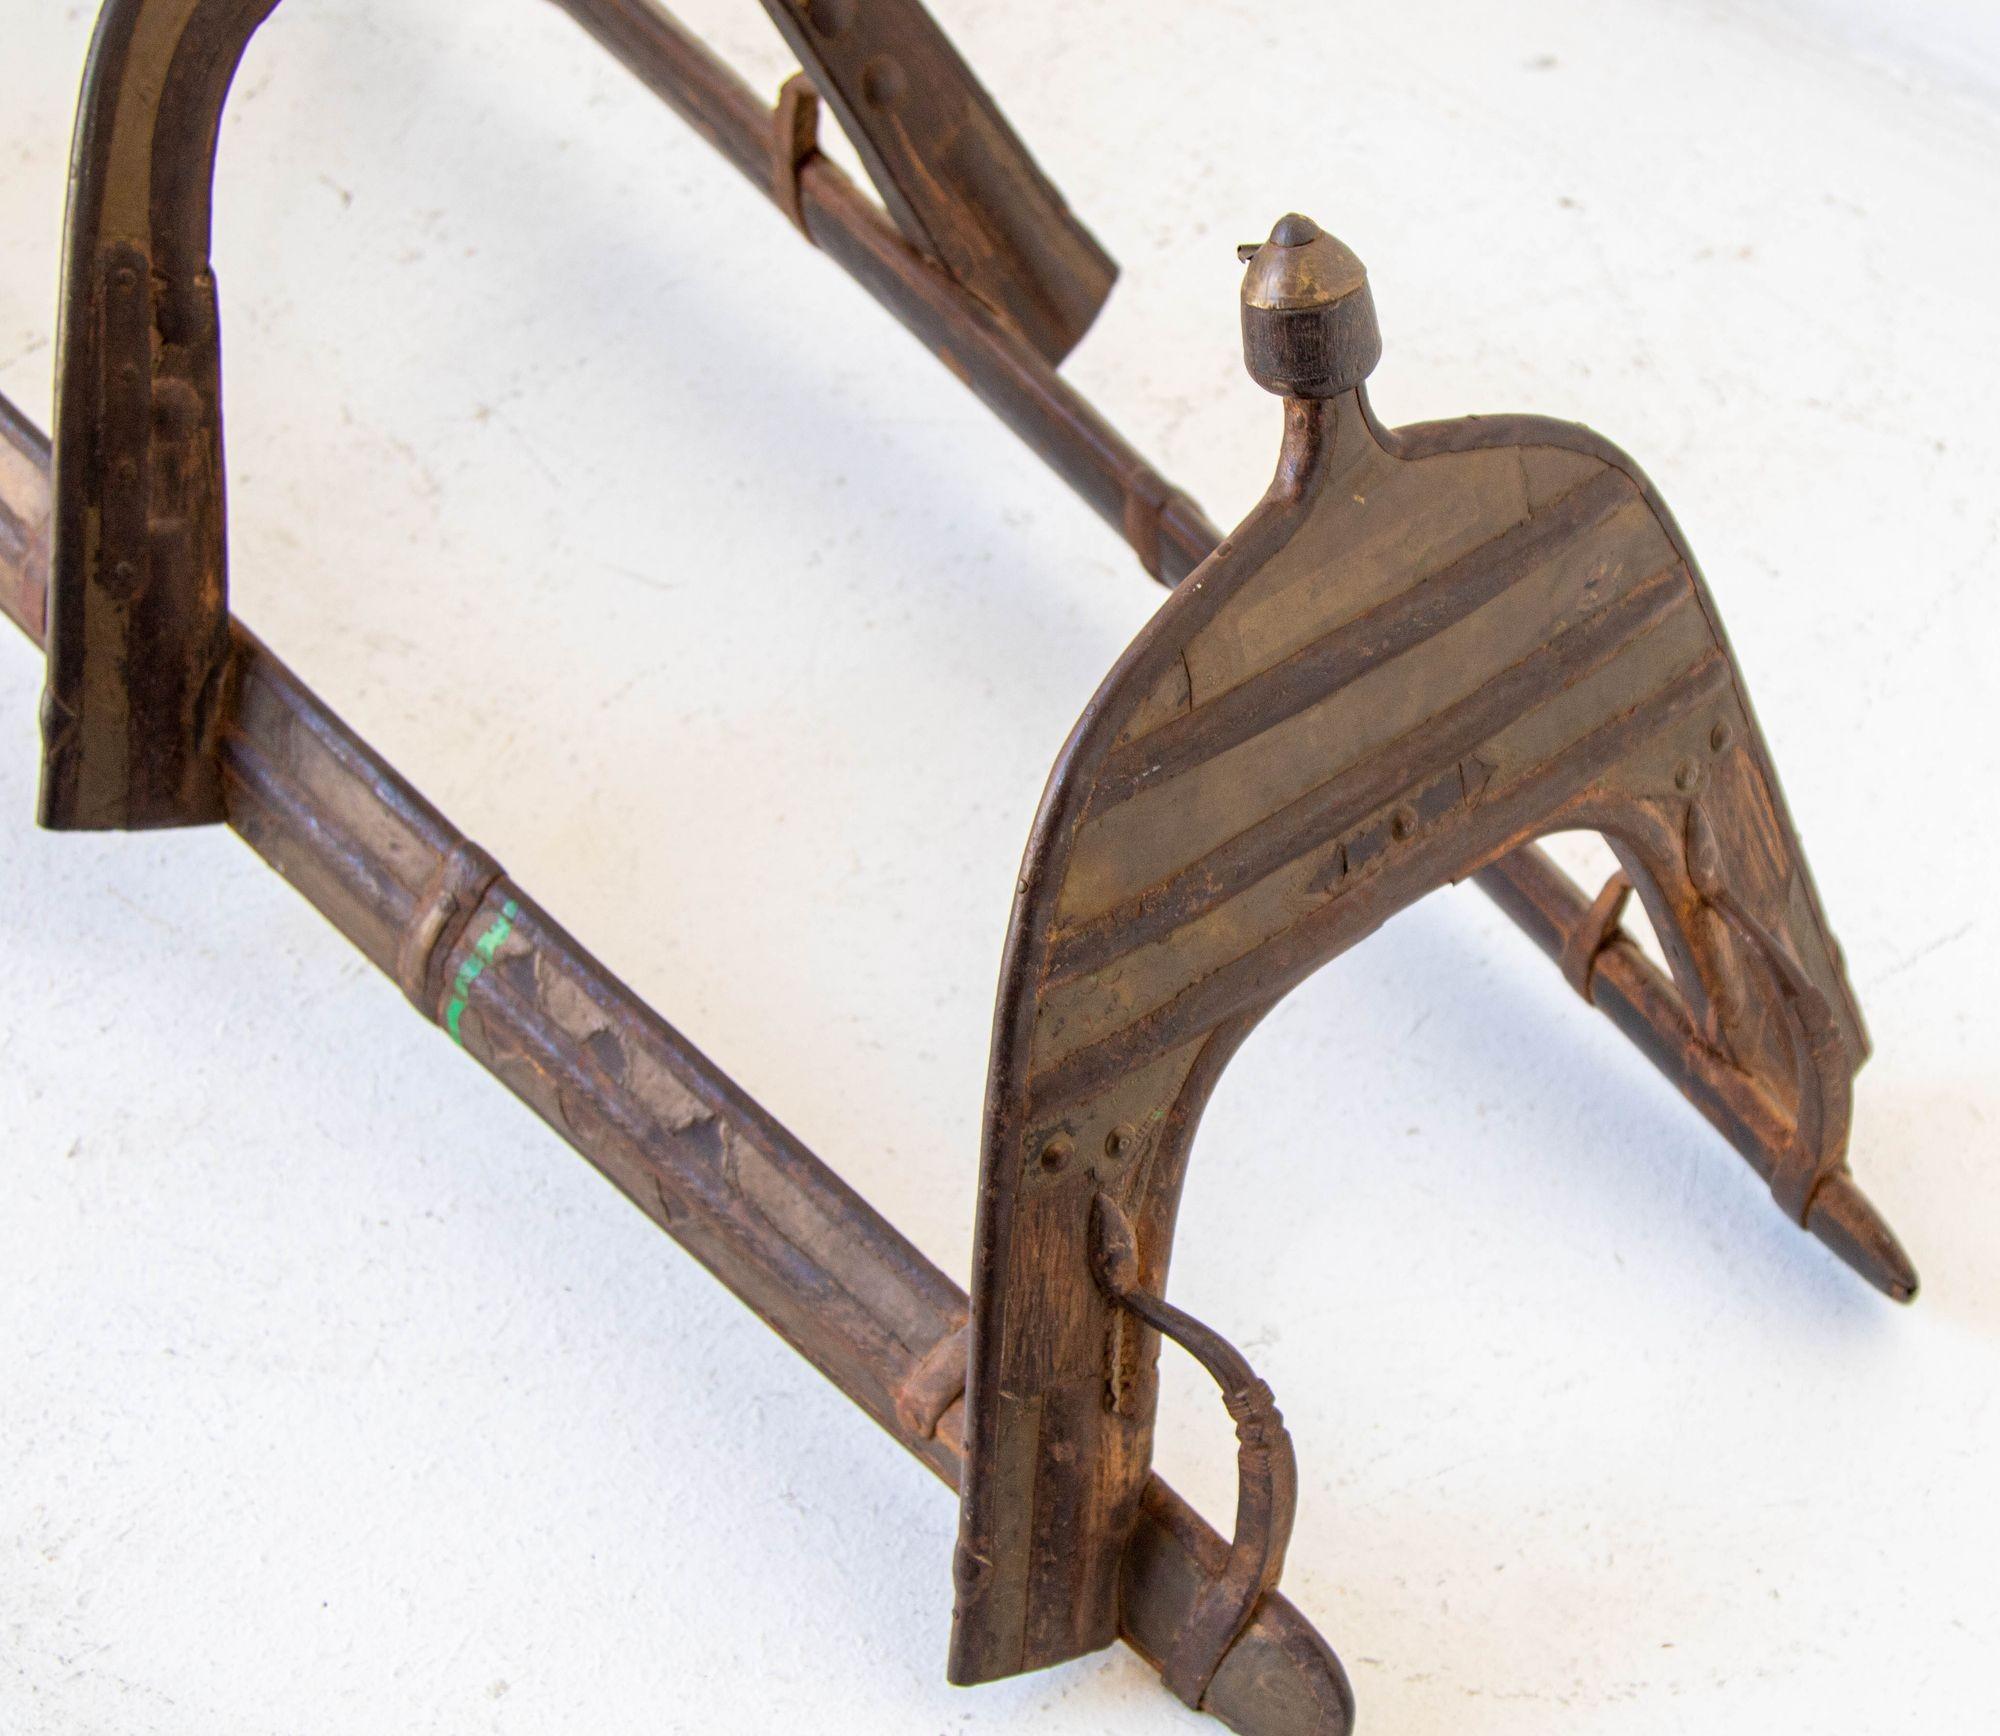 Wood and Brass Antique 19th Century Middle Eastern Camel Seat Saddle For Sale 2